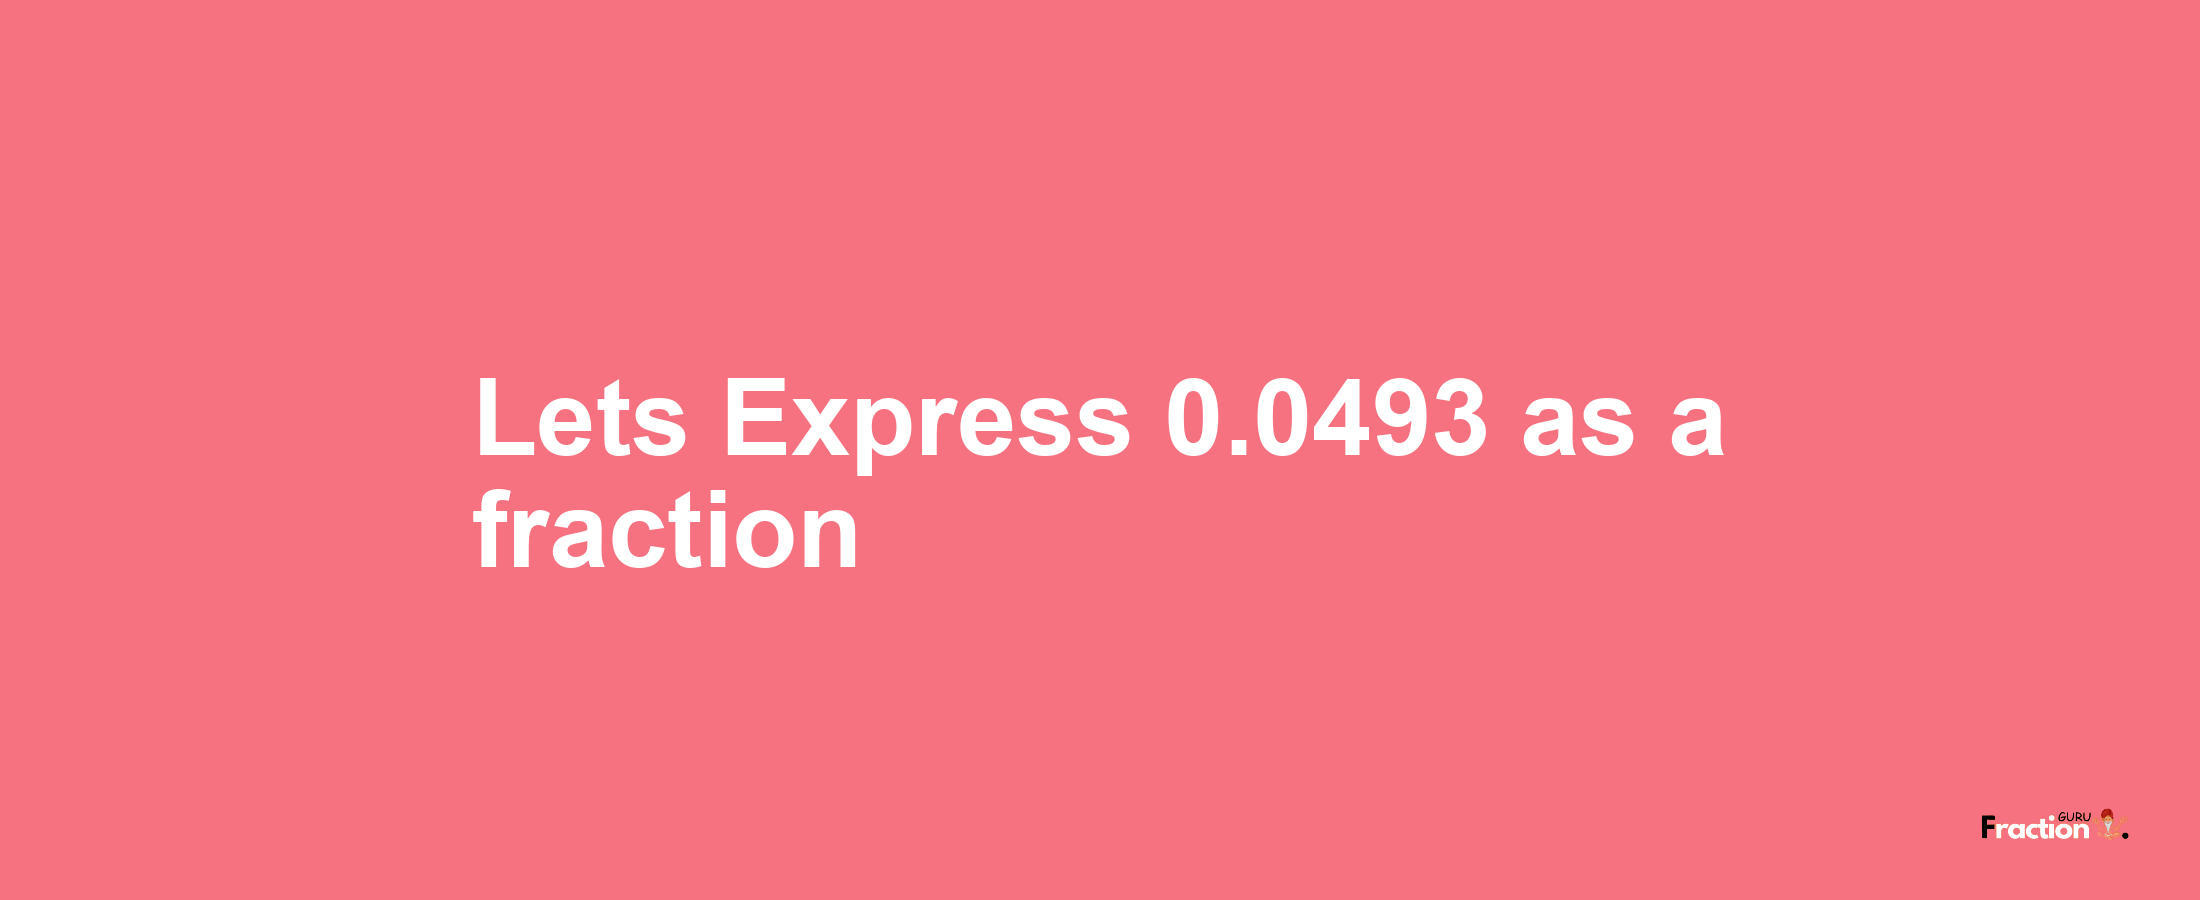 Lets Express 0.0493 as afraction